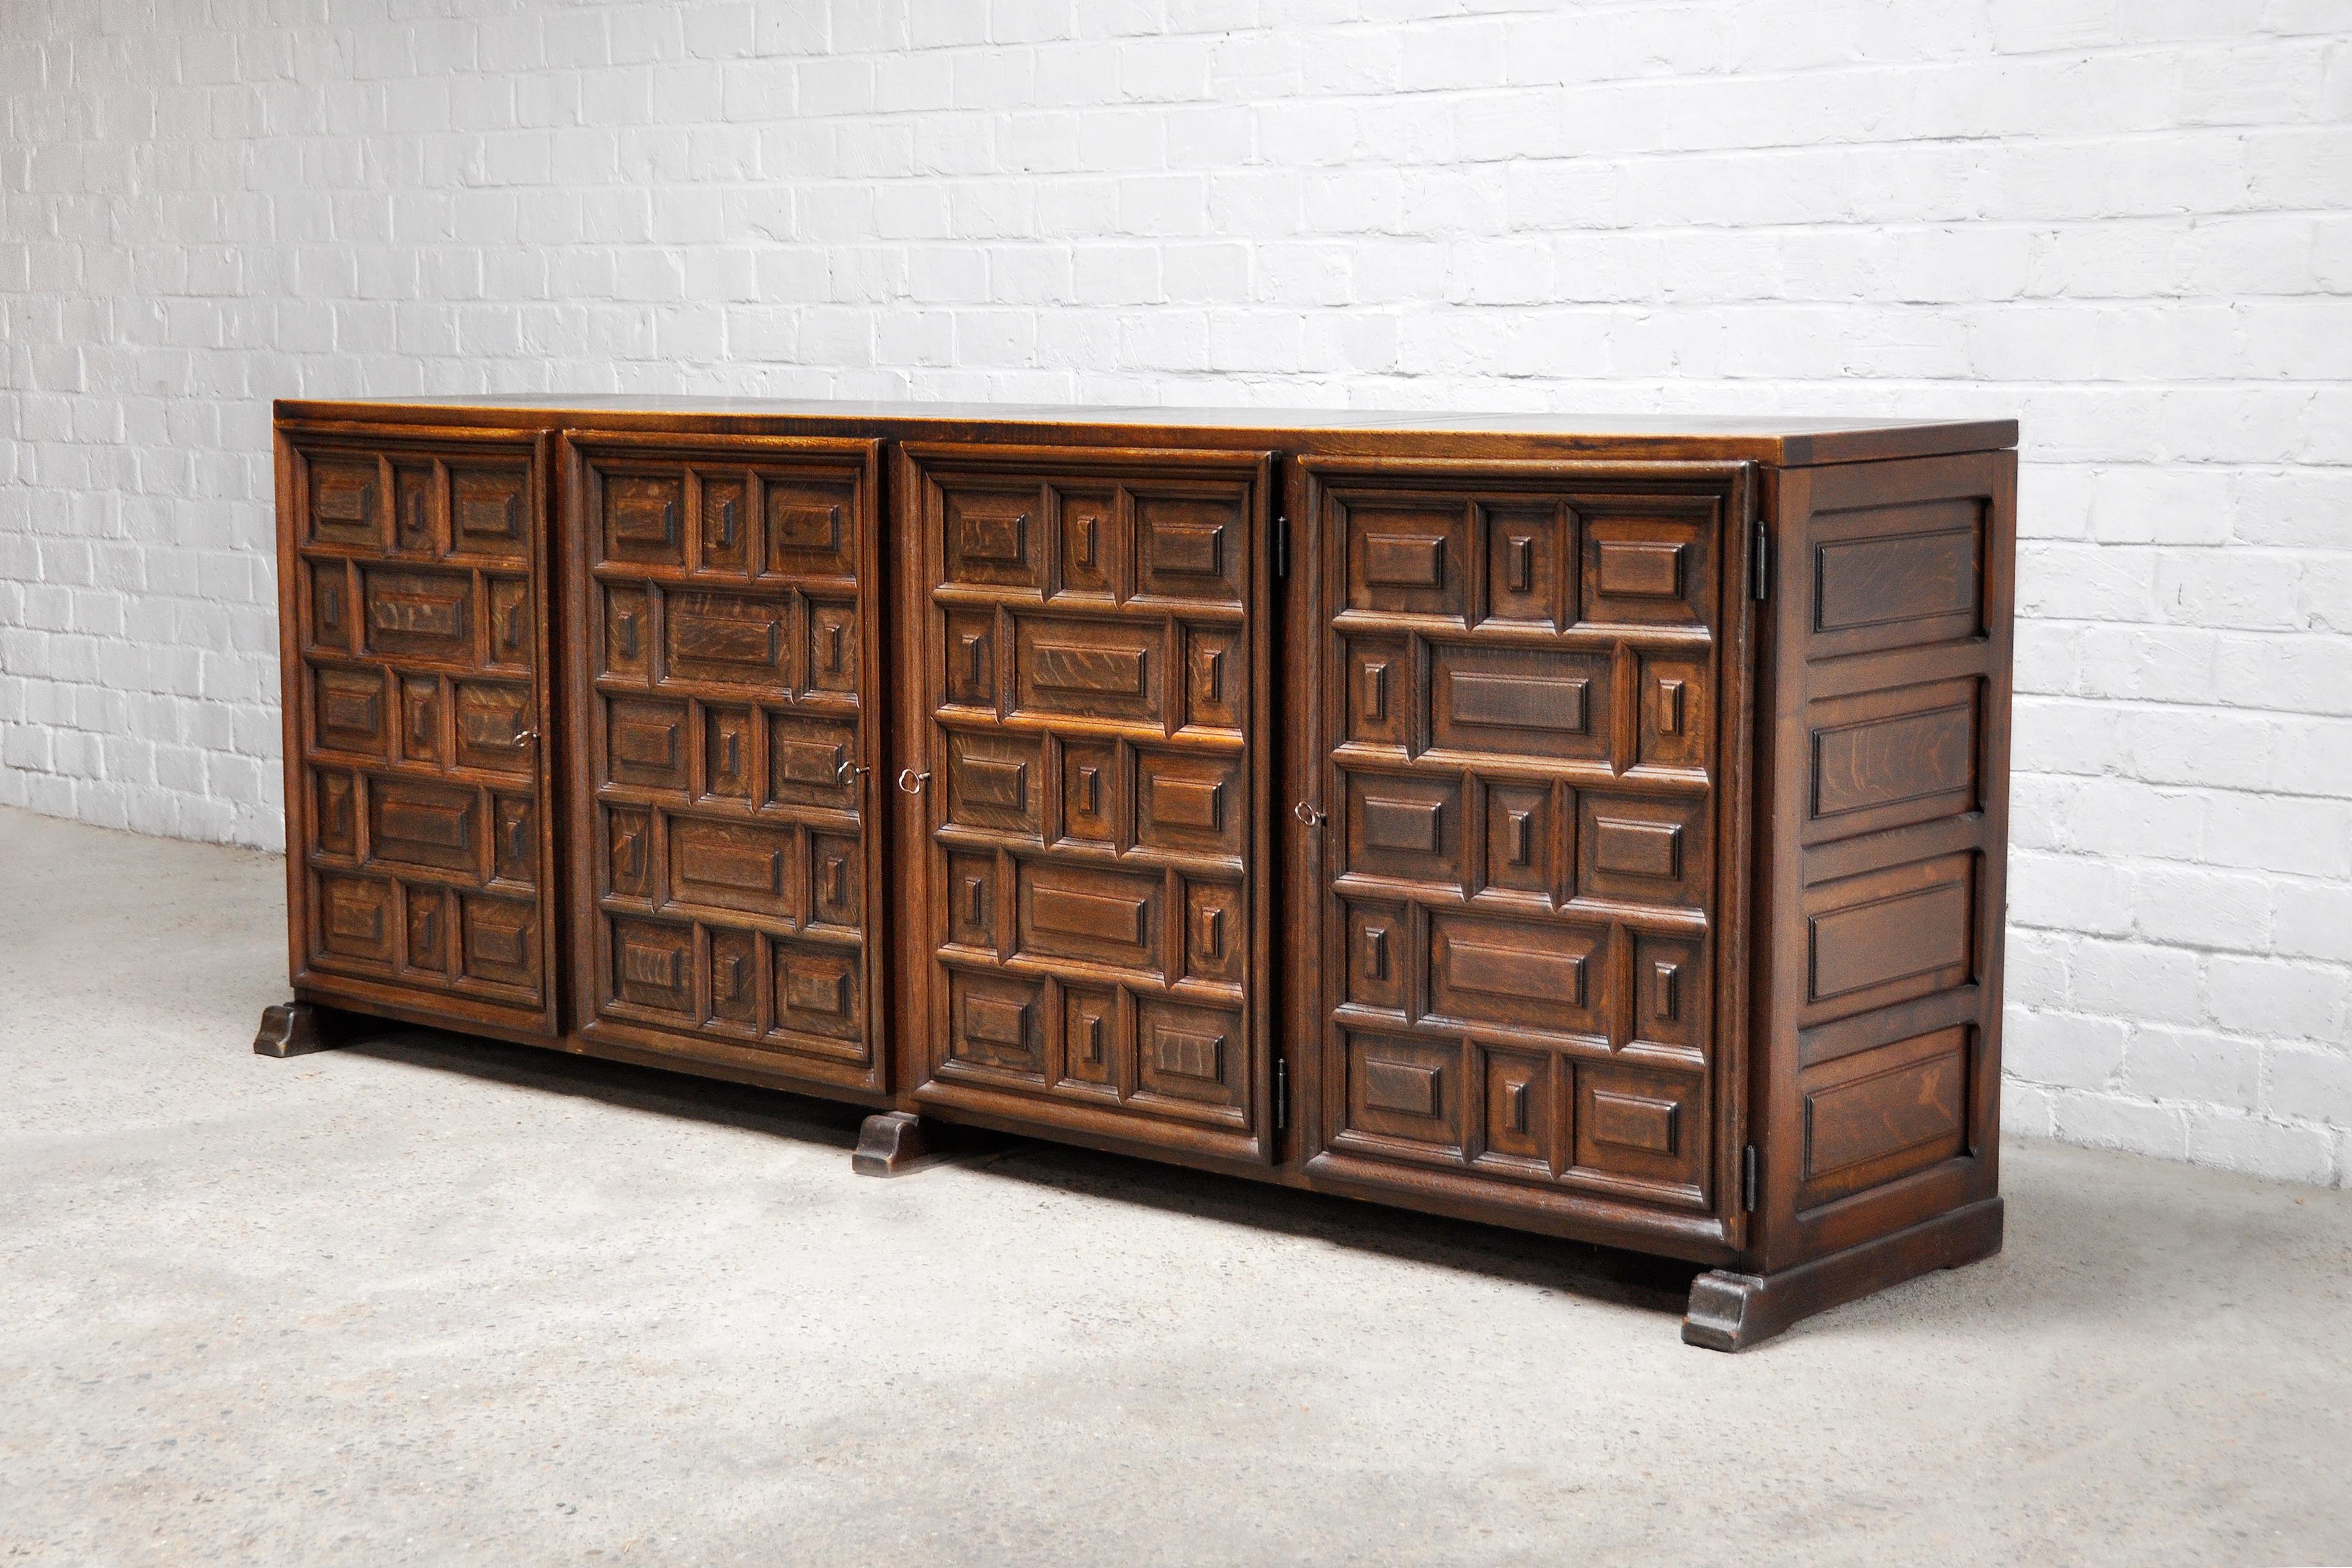 A Spanish 'Brutalist' Sideboard with profusely panelled front. The use of multiple geometric and deeply fielded panels creates a striking effect with a strong and decorative expression. The warm/dark oak gives this piece a rustic